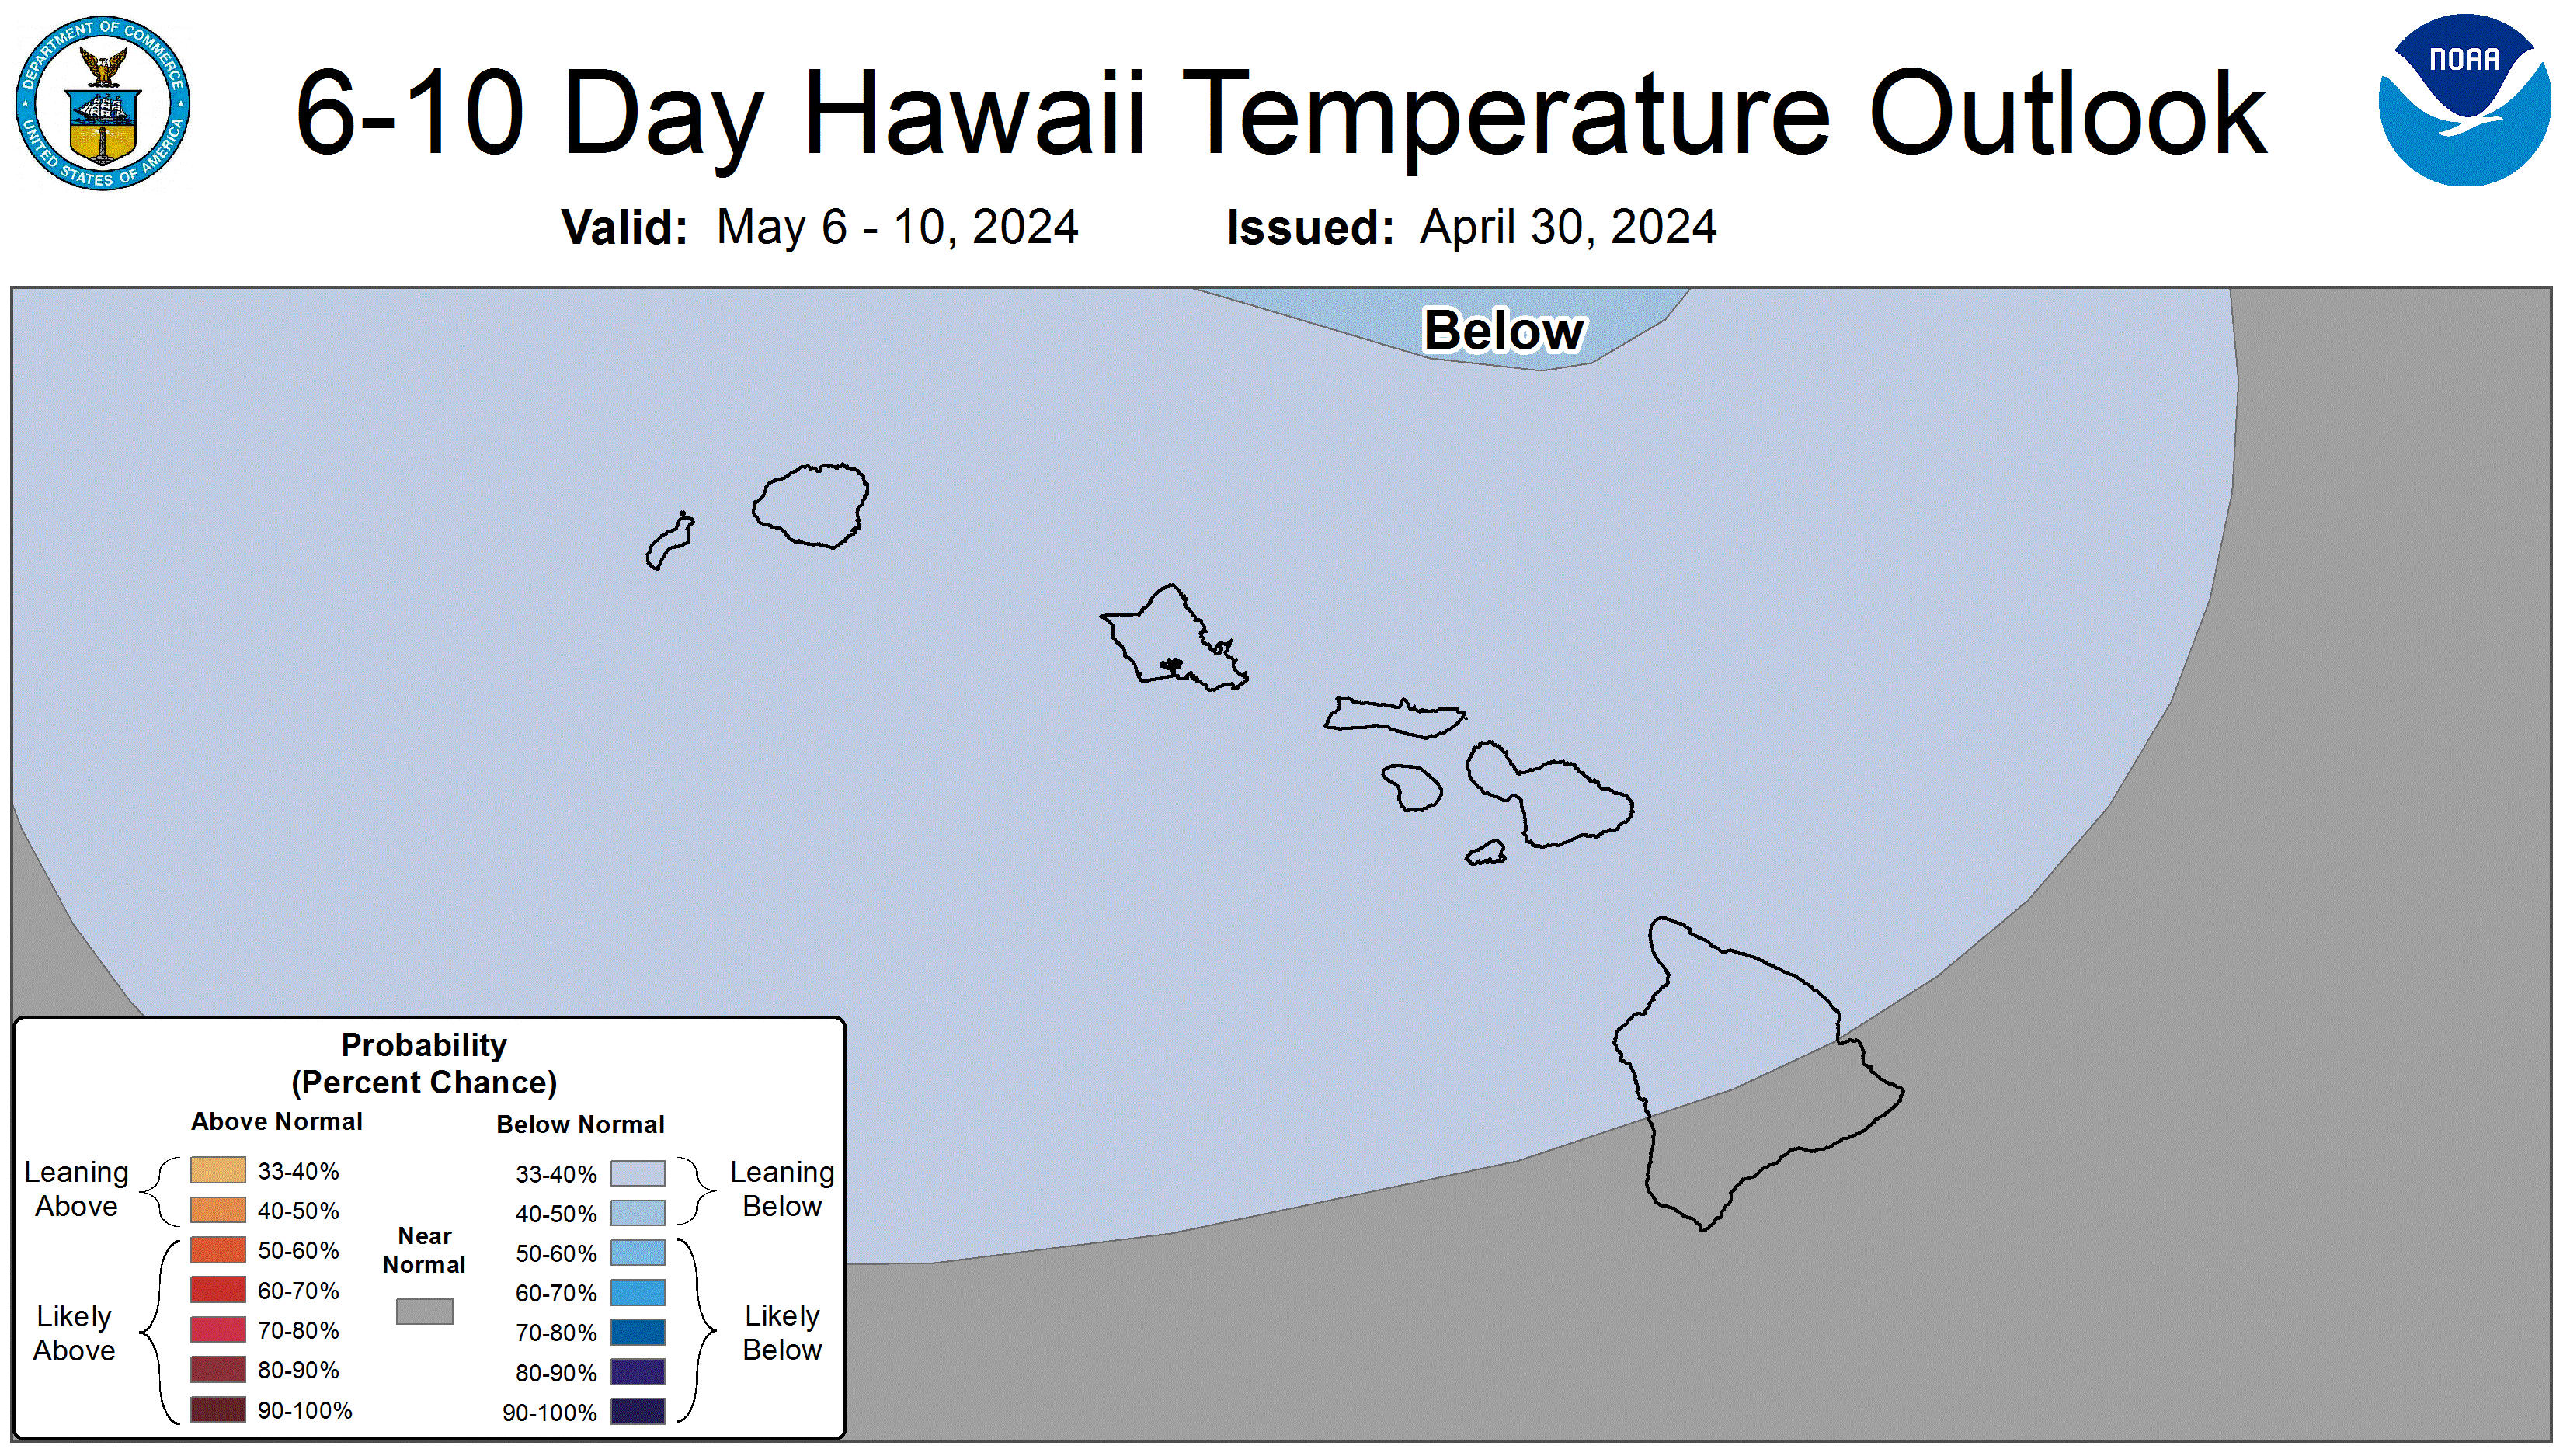 Graphical forecast for the 6 to 10 day temperature forecast. Showing a zoomed in view of the main Hawaiian Islands